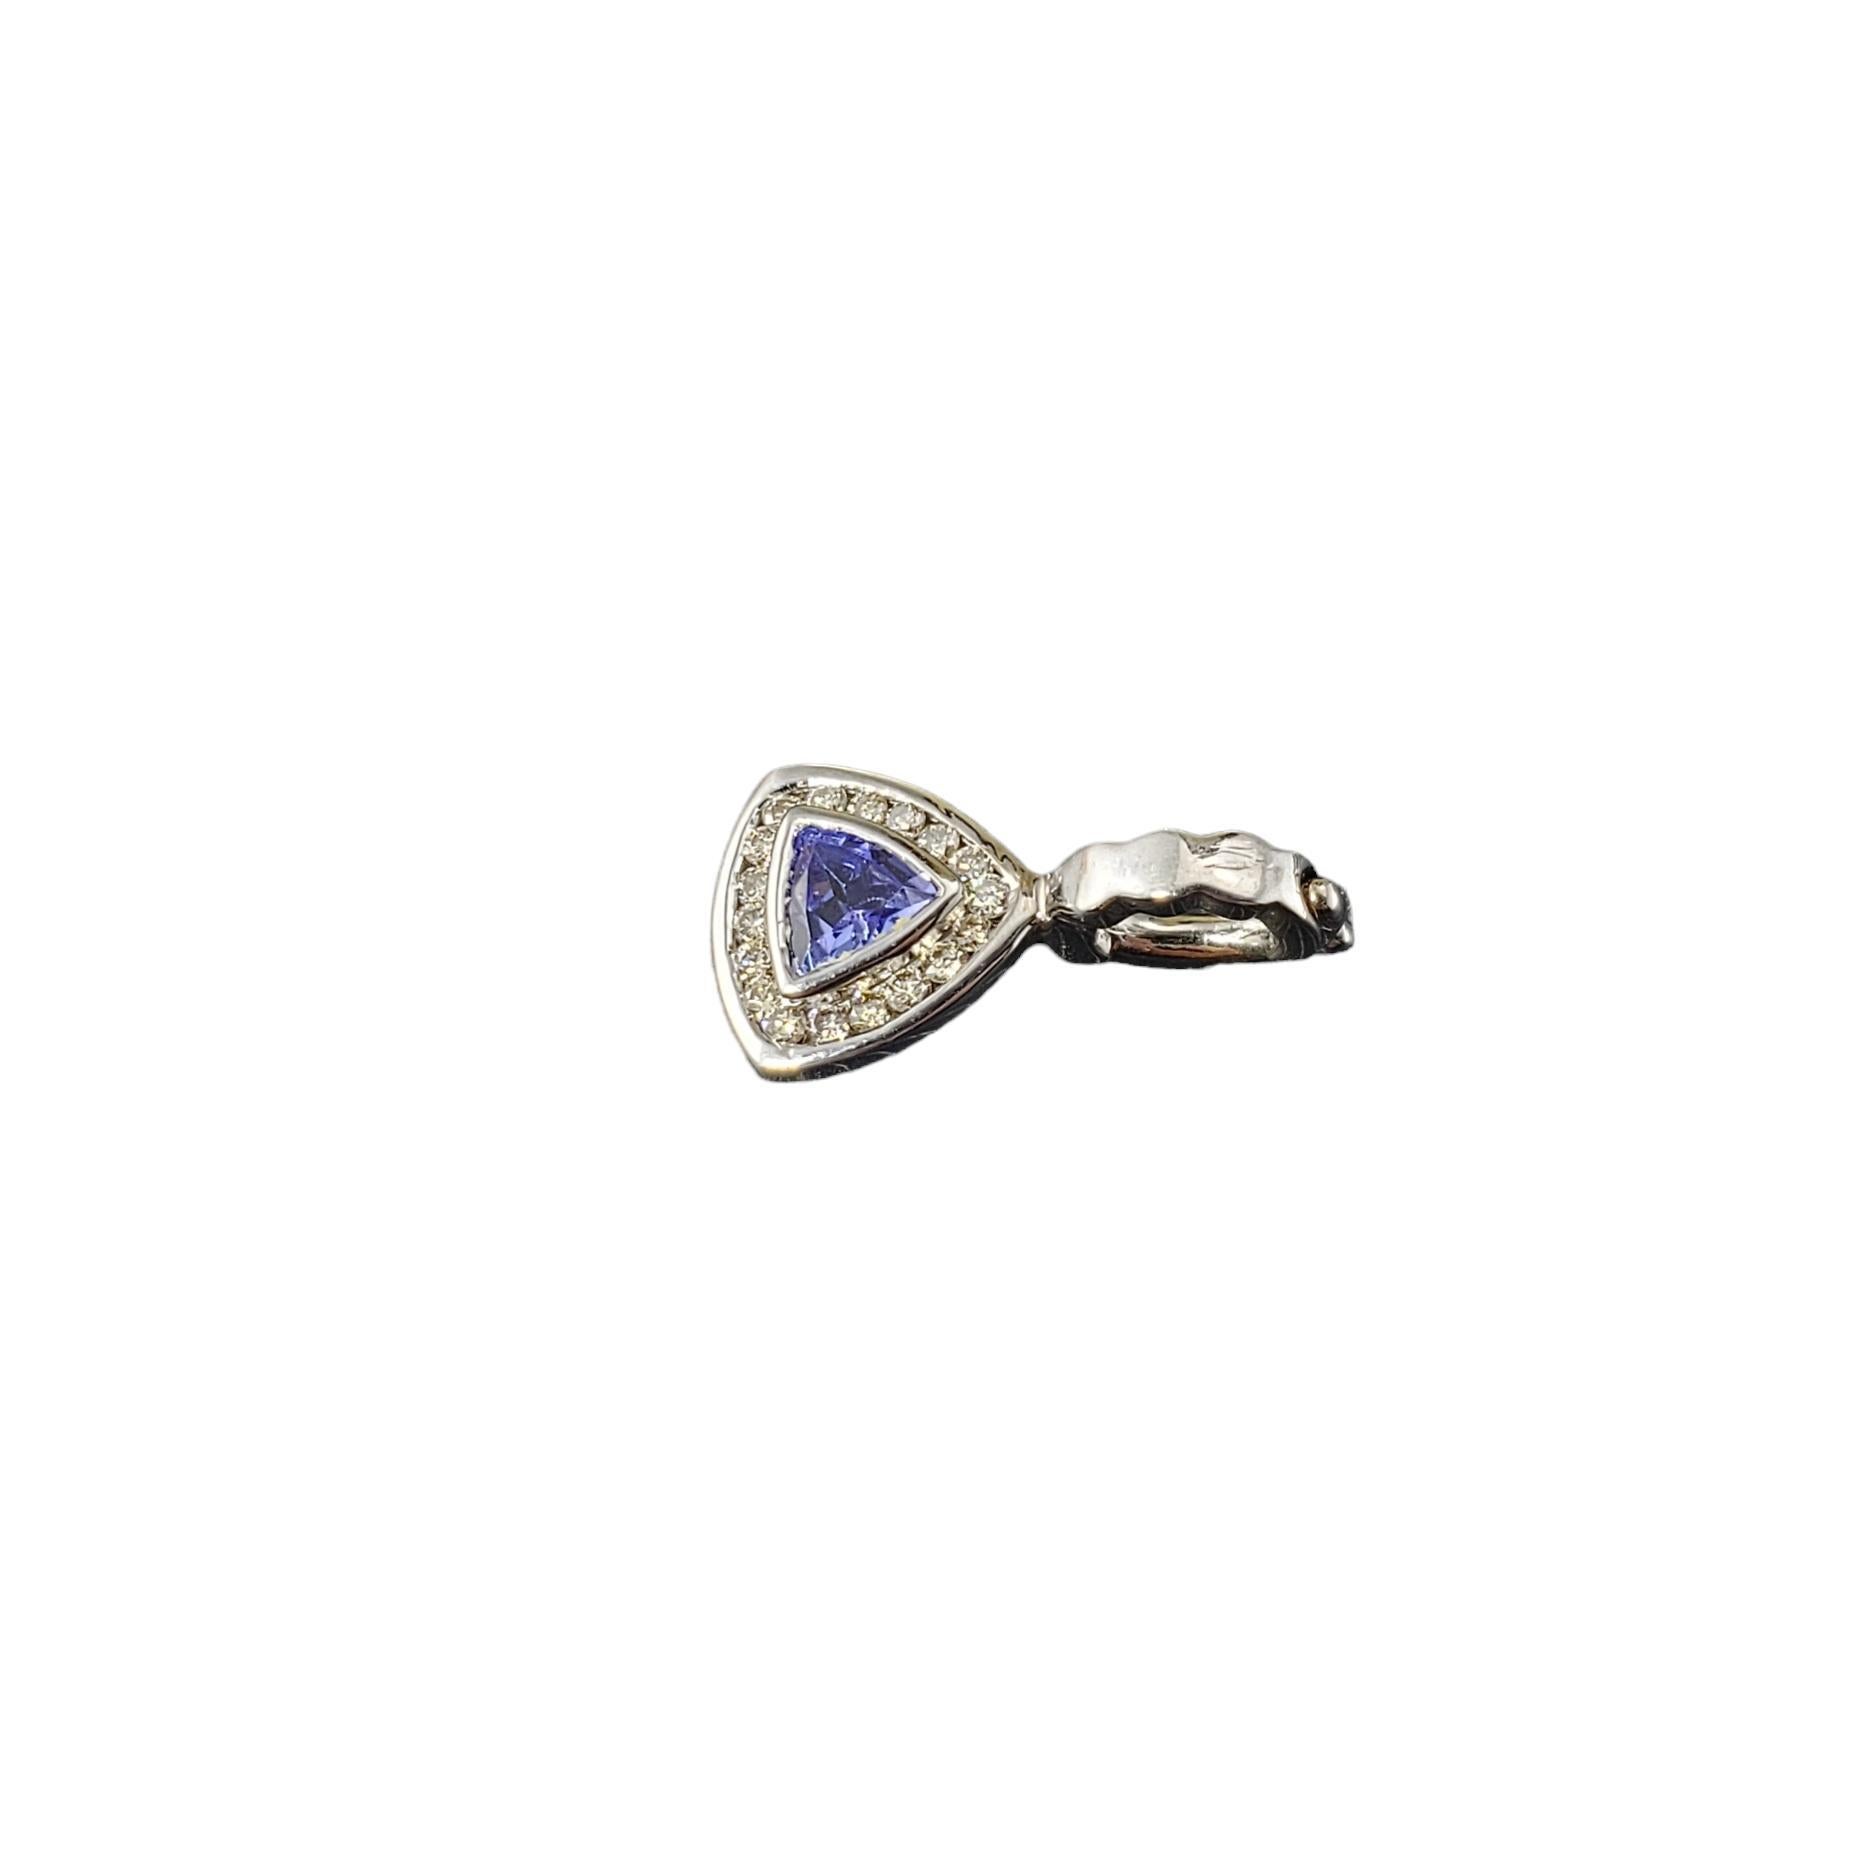 14K White Gold Tanzanite and Diamond Pendant-

This lovely pendant features one natural tanzanite stone surrounded by 18 round brilliant cut diamonds set in classic 14K white gold.

Approximate total diamond weight: .36ct.

Diamond color: